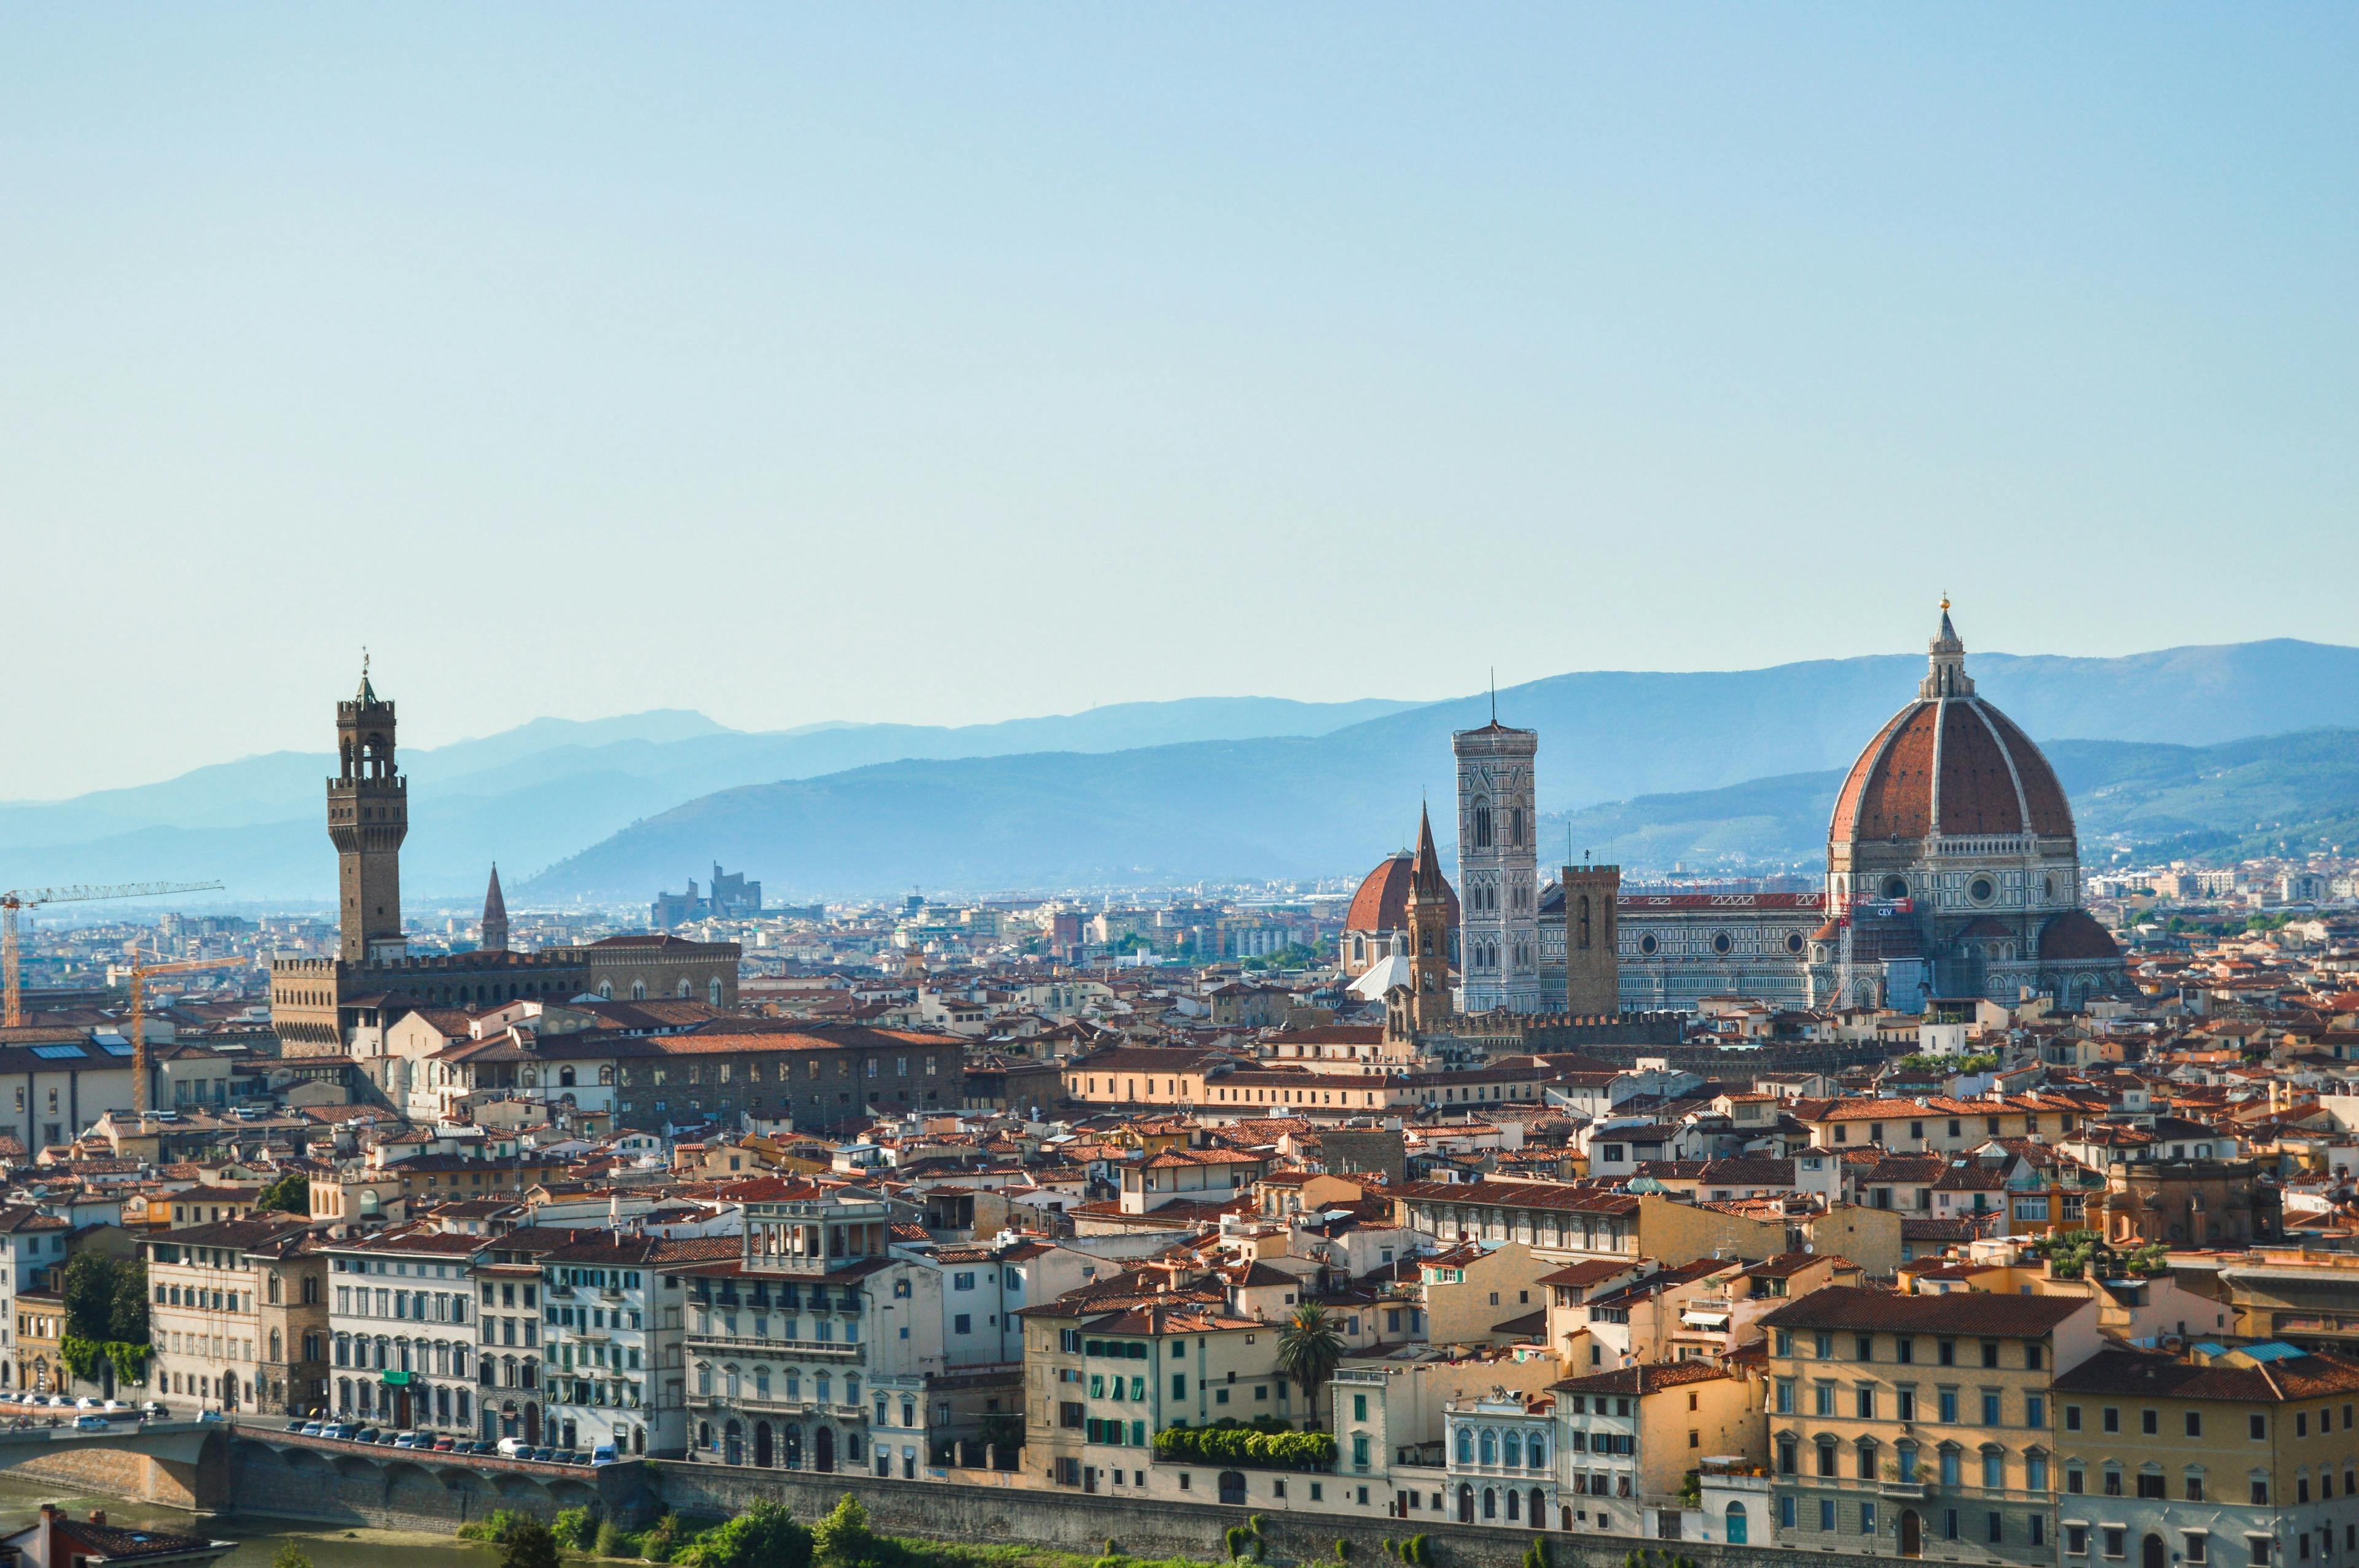 City of Florence in Italy.